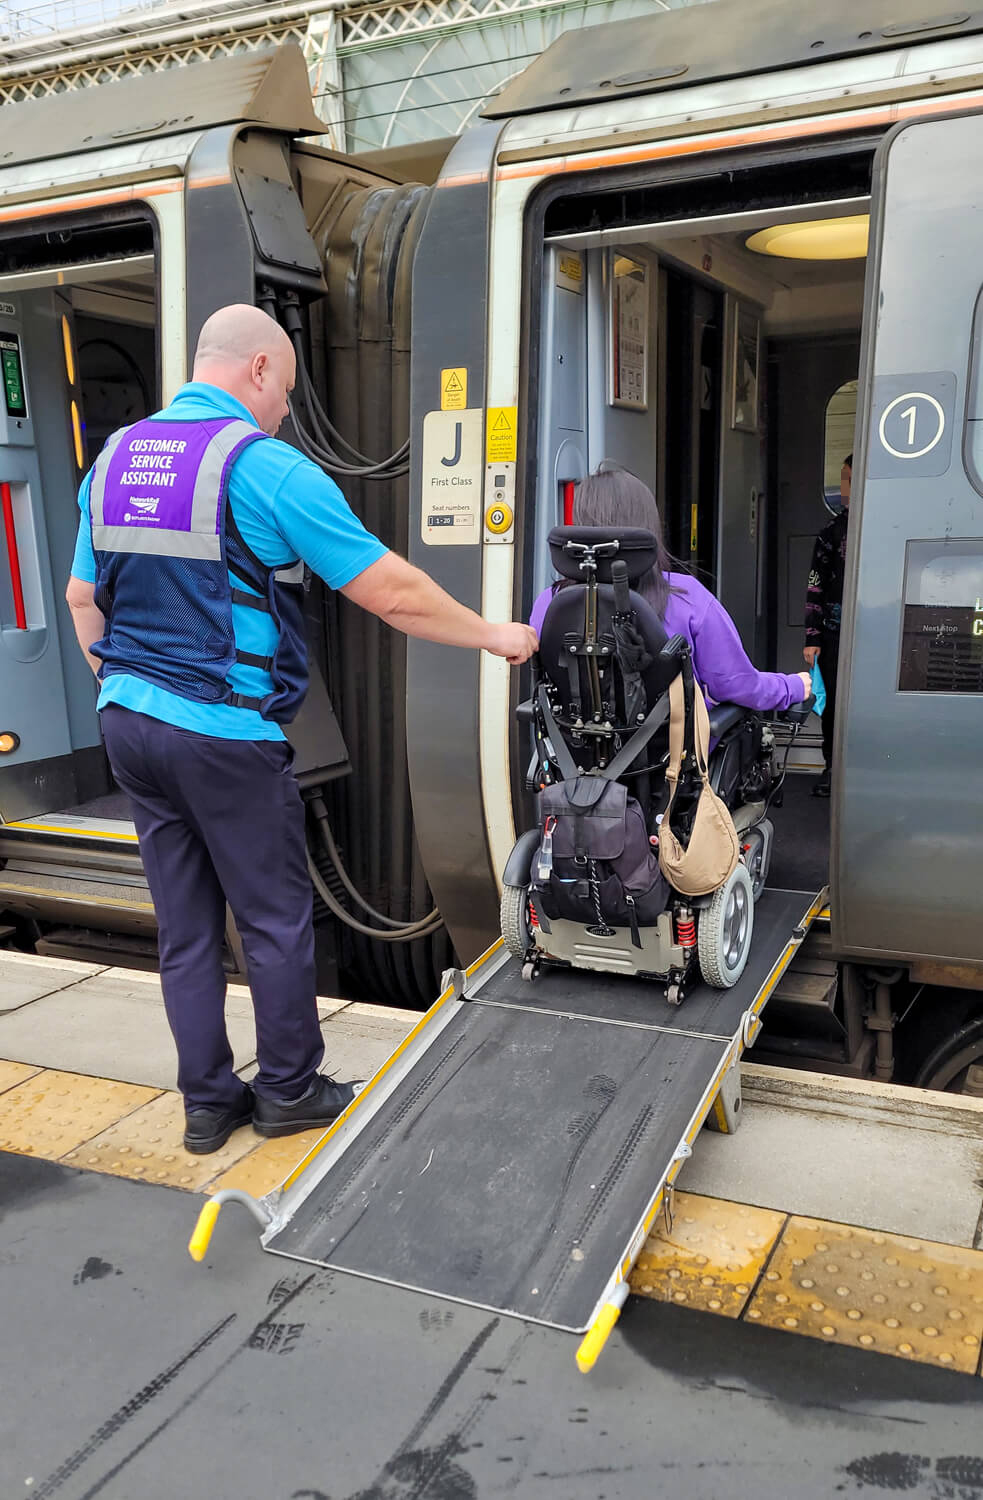 Emma driving her power wheelchair up a boarding ramp into an Avanti West Coast train. The Network Rail customer service representative is standing behind Emma holding on to the back of her chair.